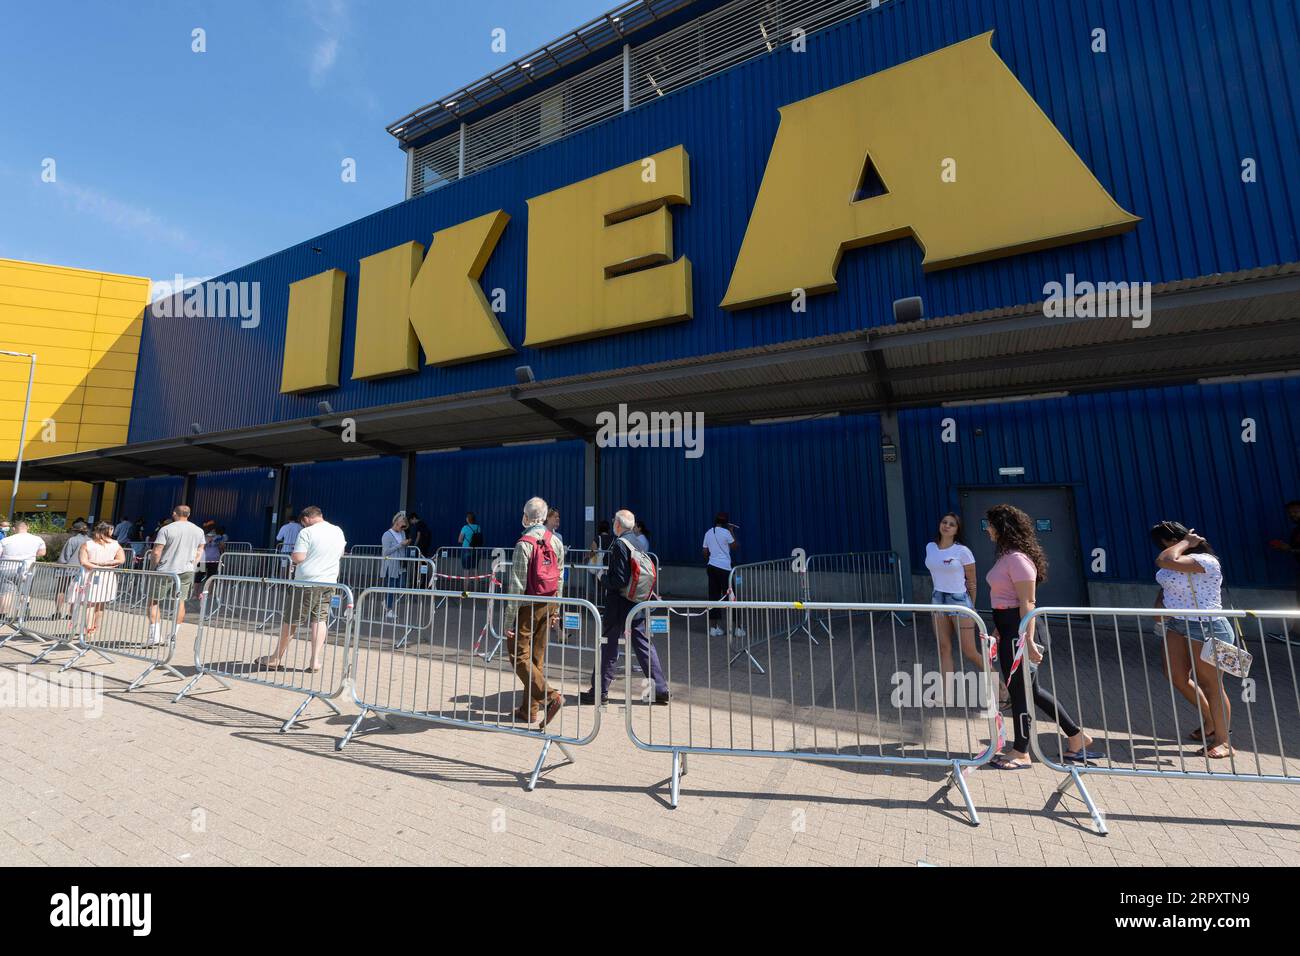 200602 -- LONDON, June 2, 2020 Xinhua -- Customers keep social distancing whilst queuing up outside the IKEA store in Wembley, London, Britain, June 2, 2020. Photo by Ray Tang/Xinhua BRITAIN-LONDON-COVID-19-IKEA-REOPENING PUBLICATIONxNOTxINxCHN Stock Photo